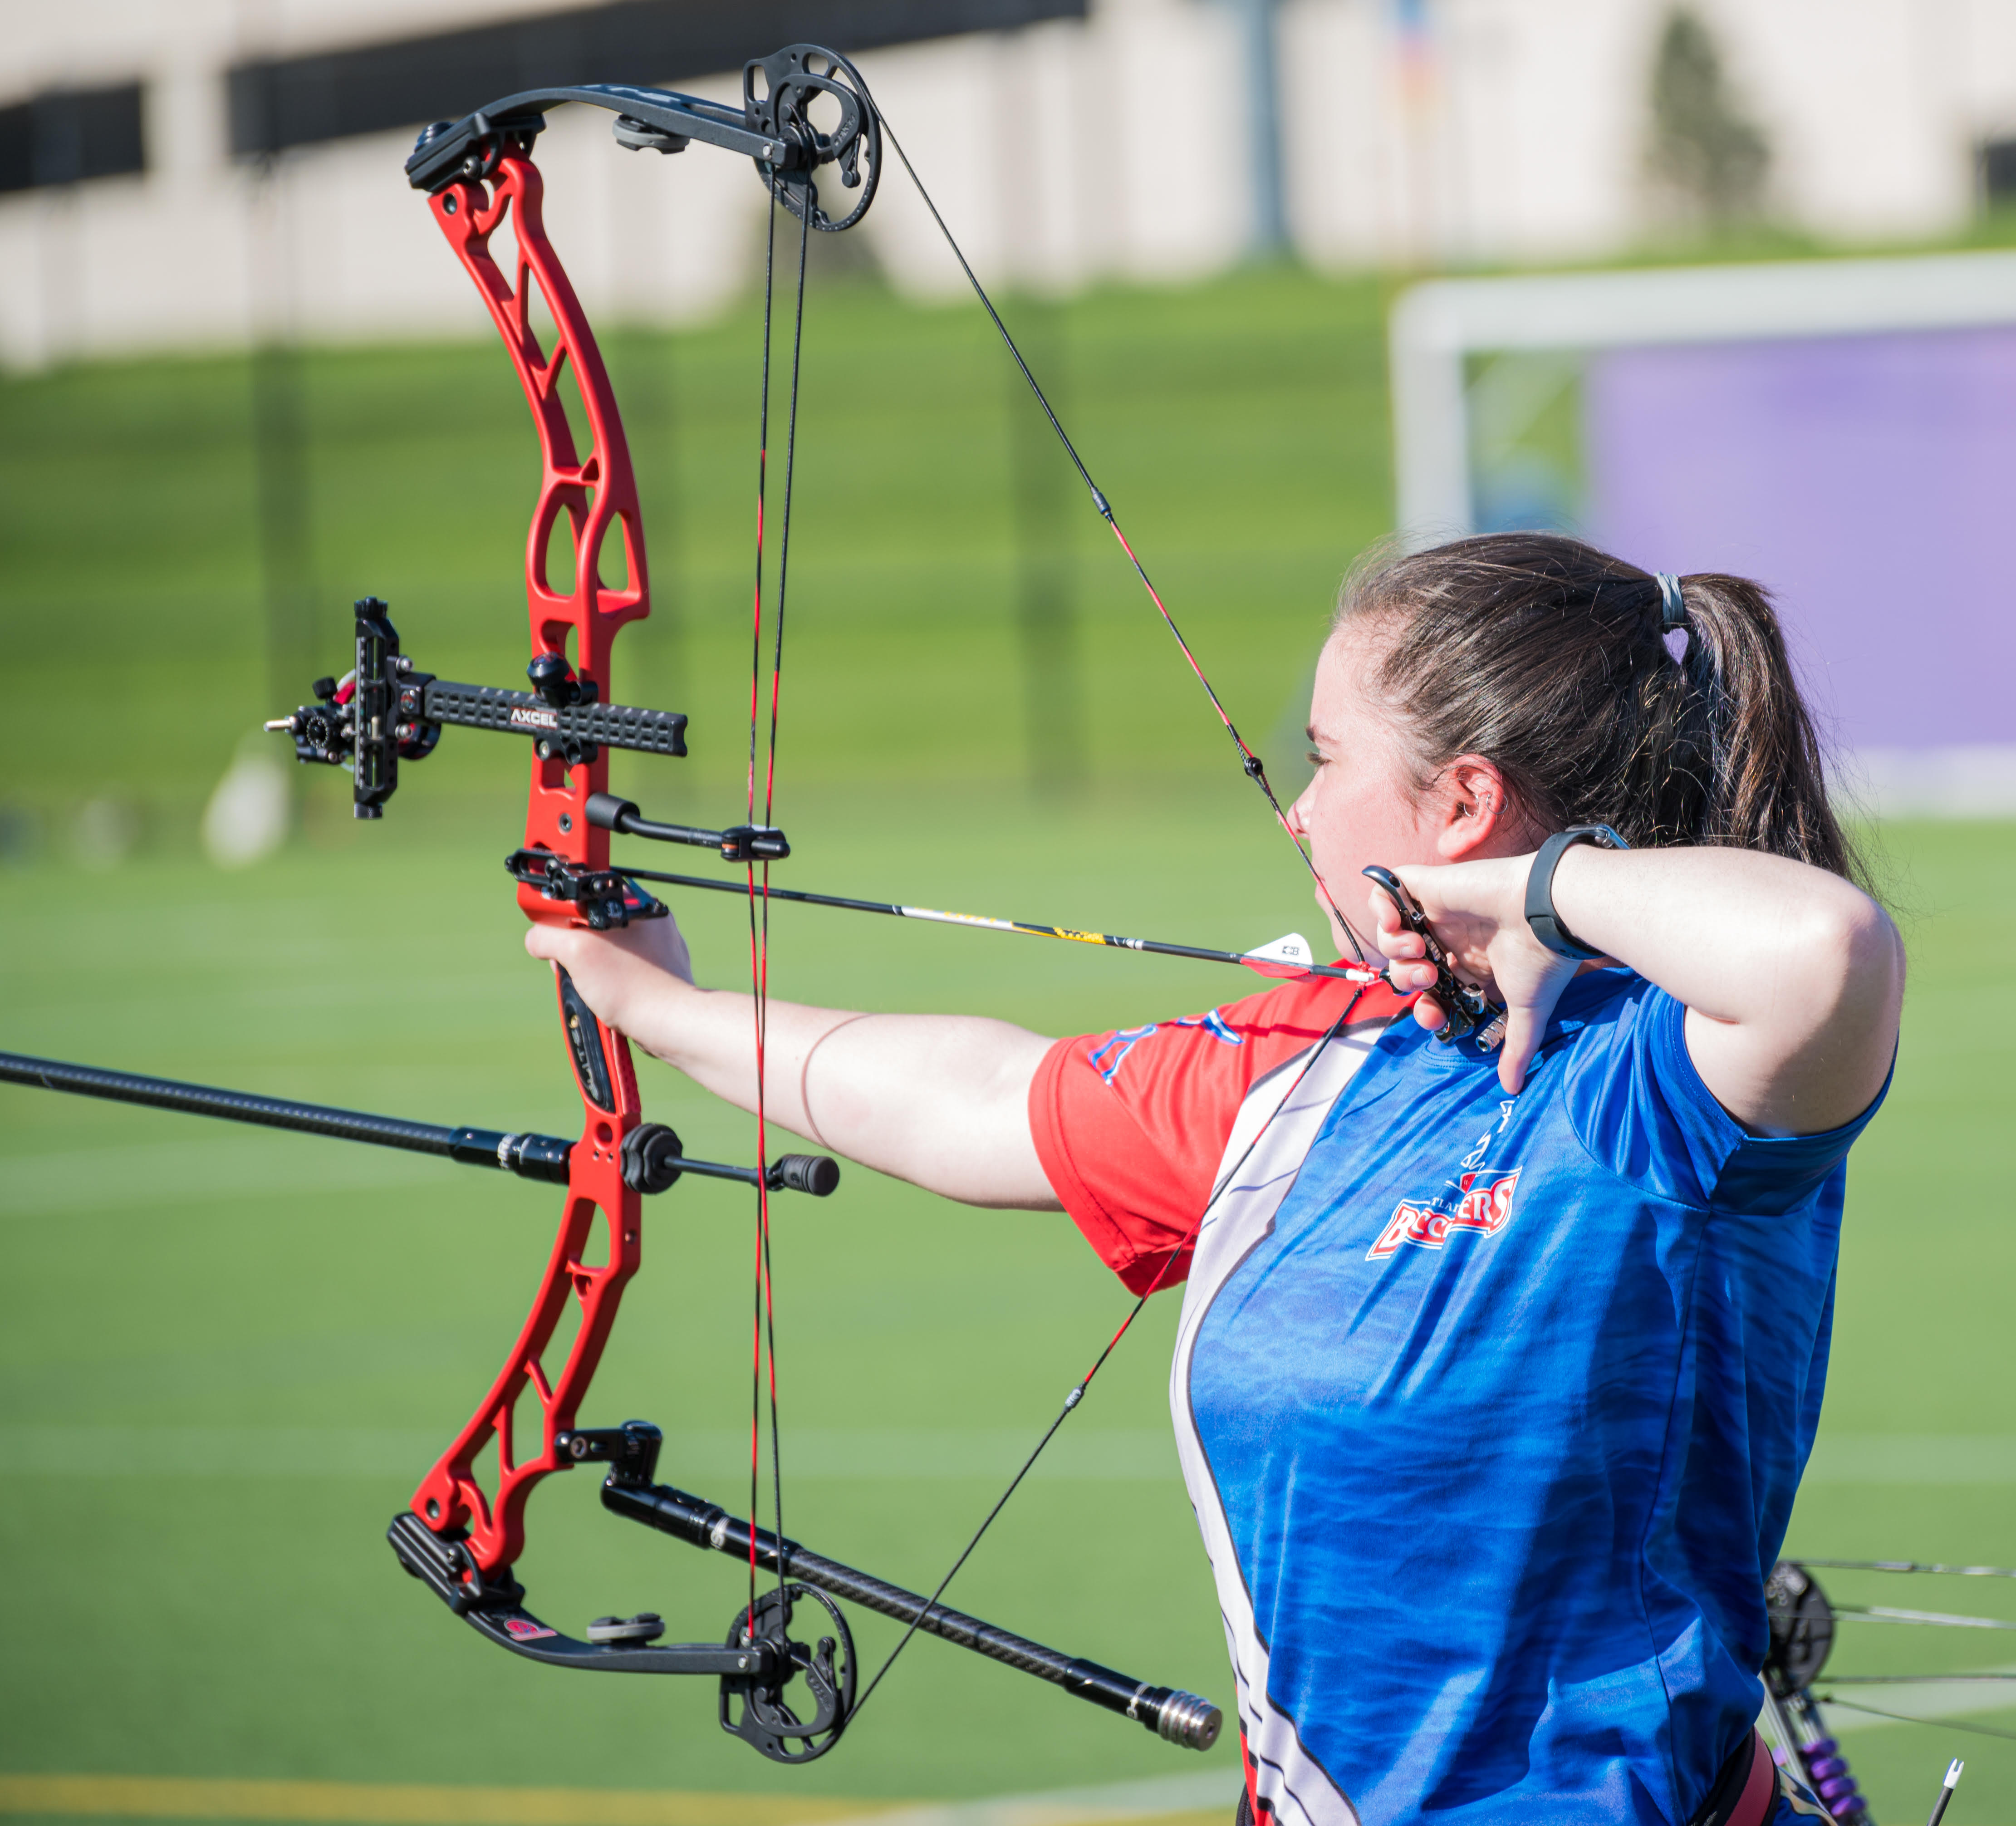 Atlantic Cape archer Jocelyn Geese competes at the 2022 USA Archery Collegiate Target Regionals-East Region at James Madison University April 23 and 24 in Virginia.